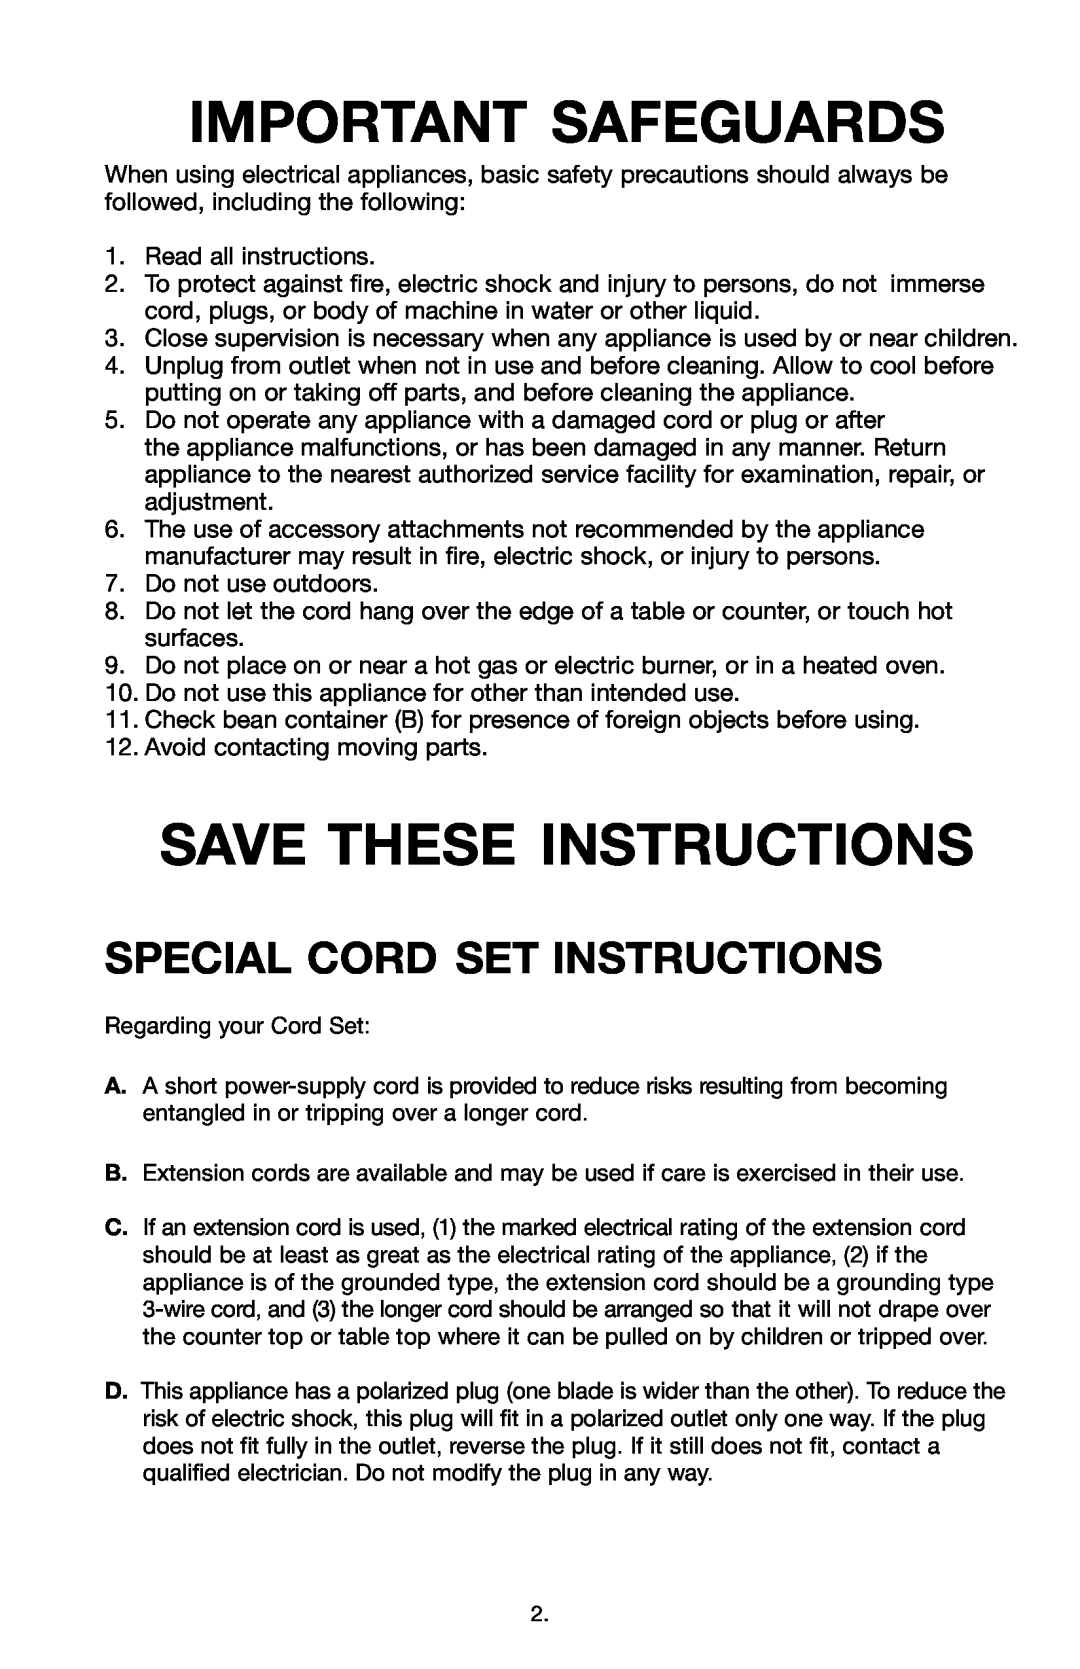 Capresso 559 warranty Important Safeguards, Save These Instructions, Special Cord Set Instructions 